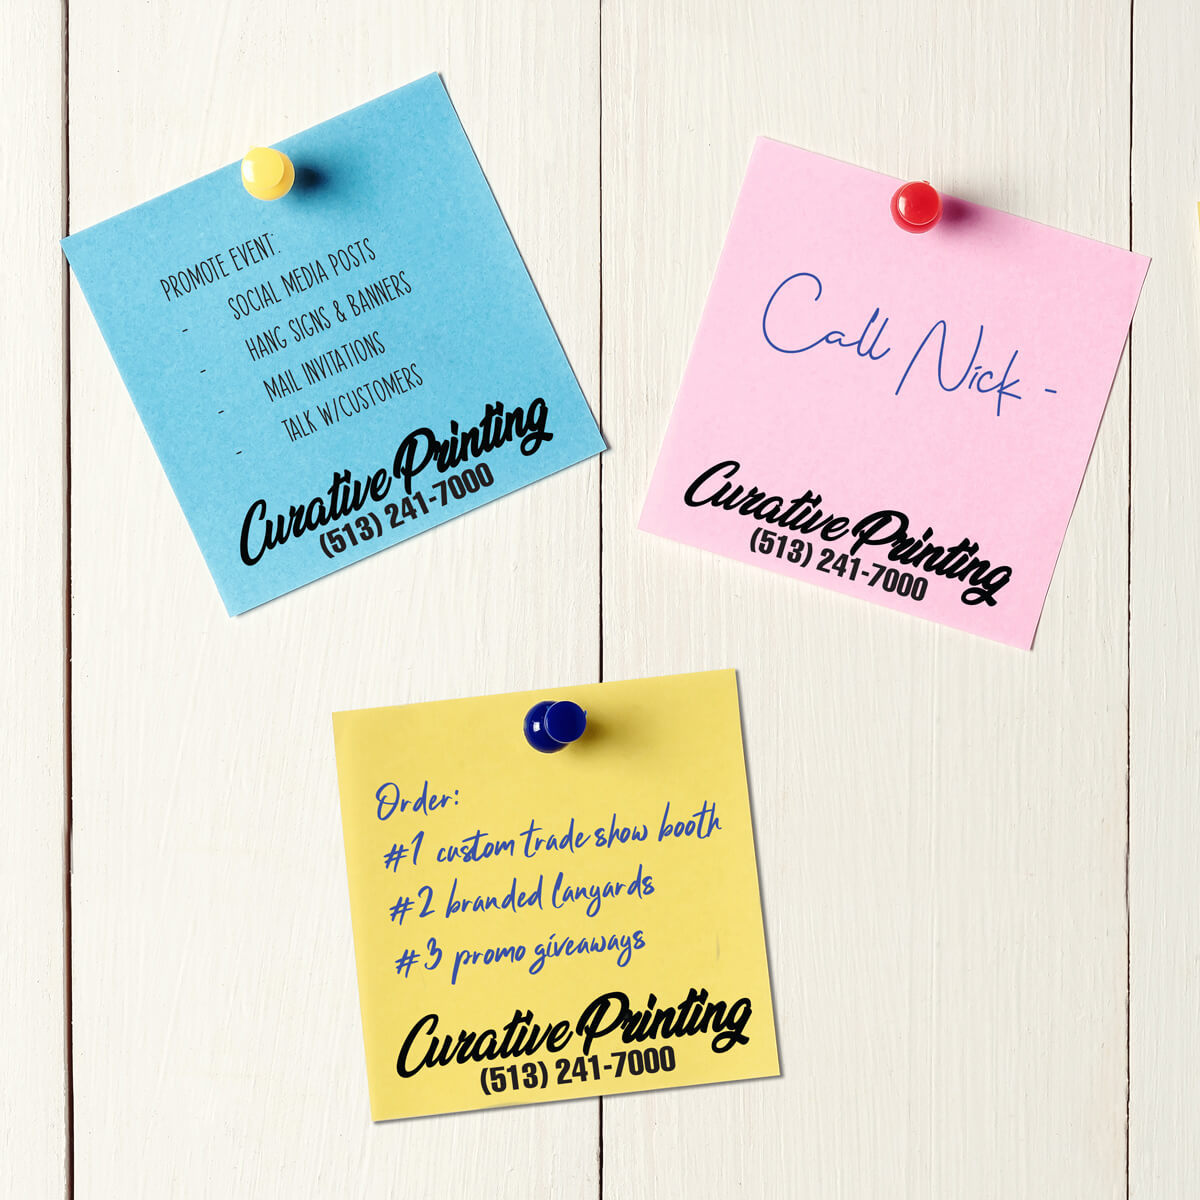 Push pin design post-it notes paper print by Curative Printing